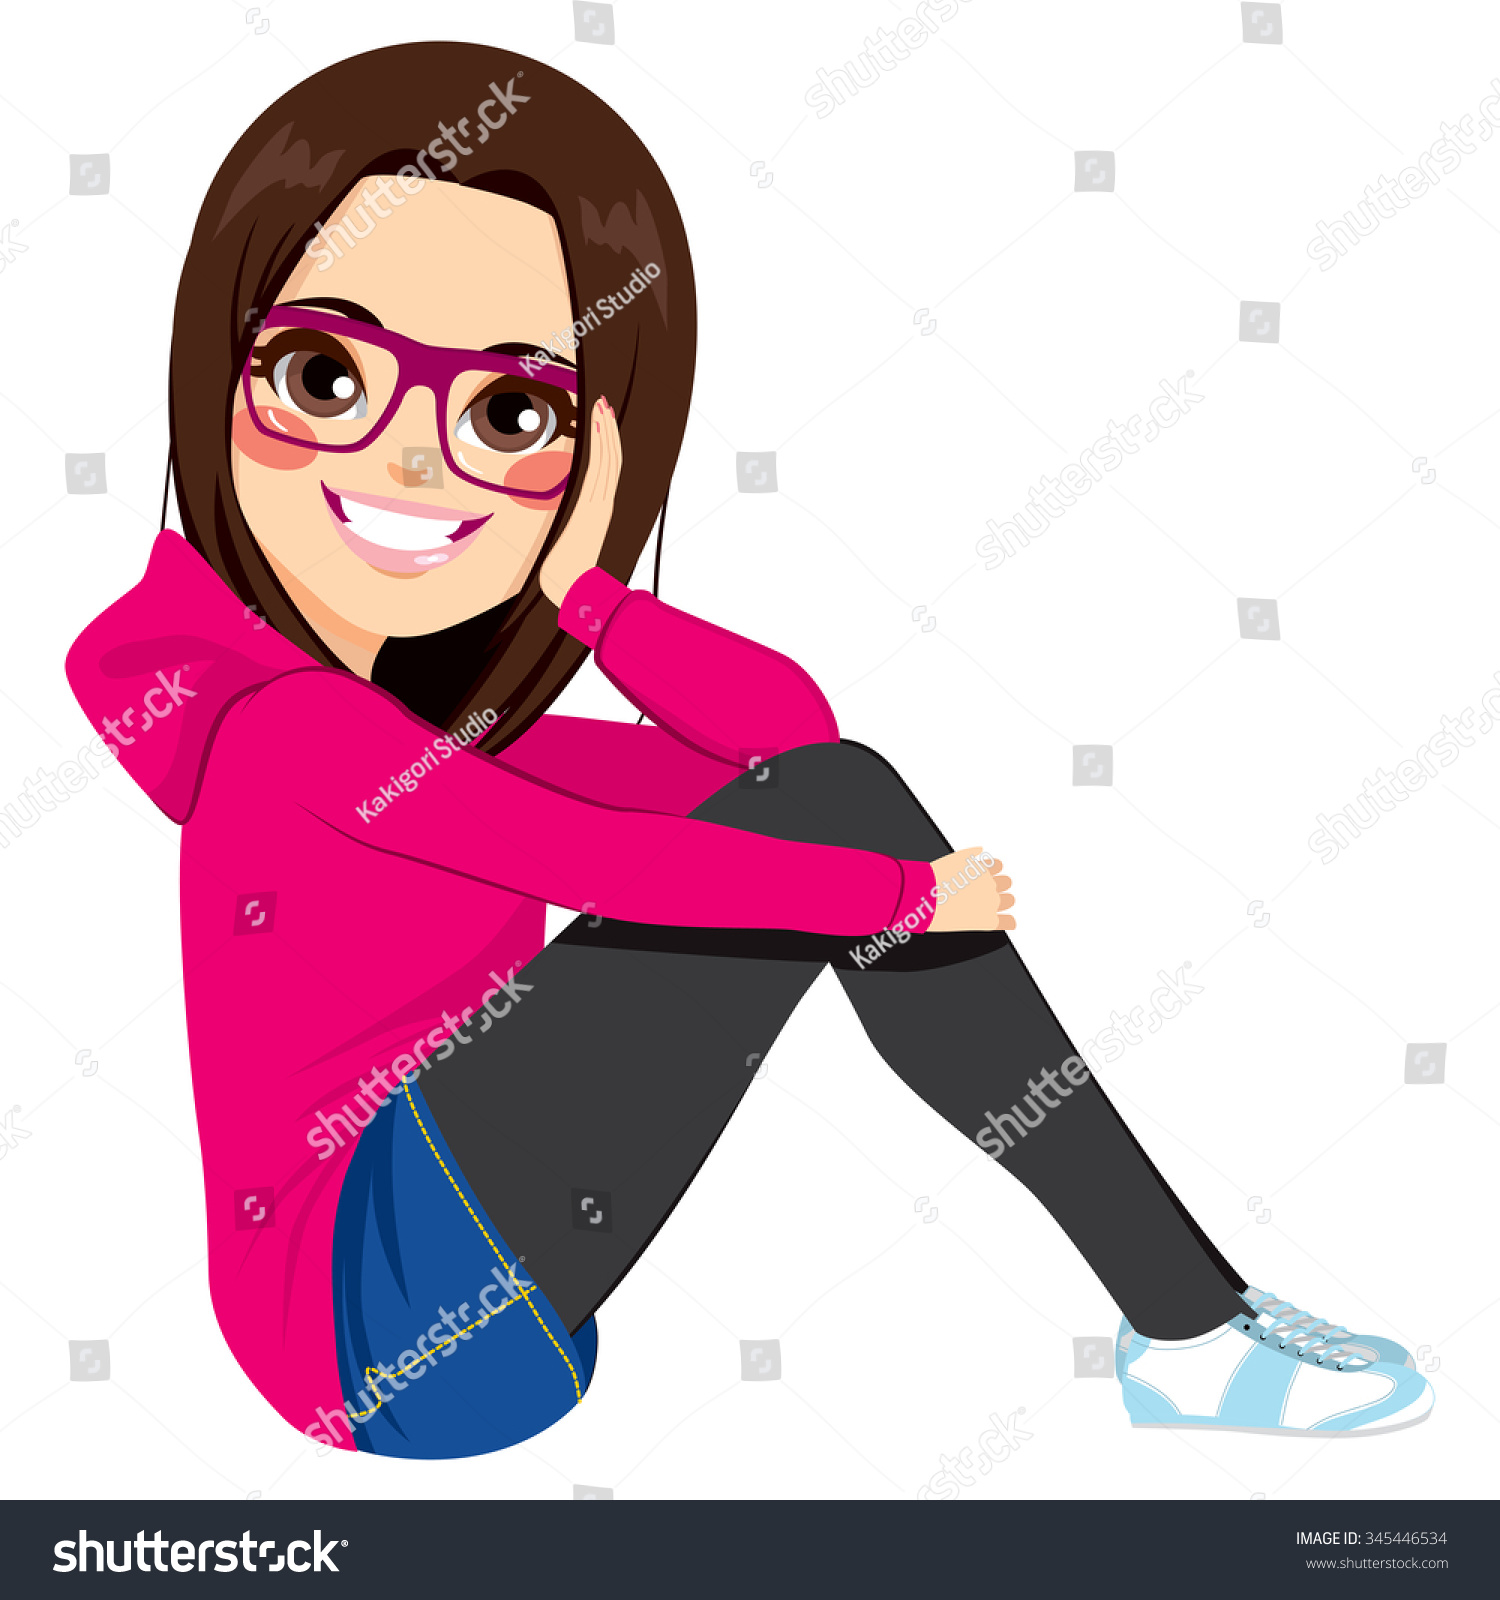 clipart girl with brown hair and glasses - photo #6